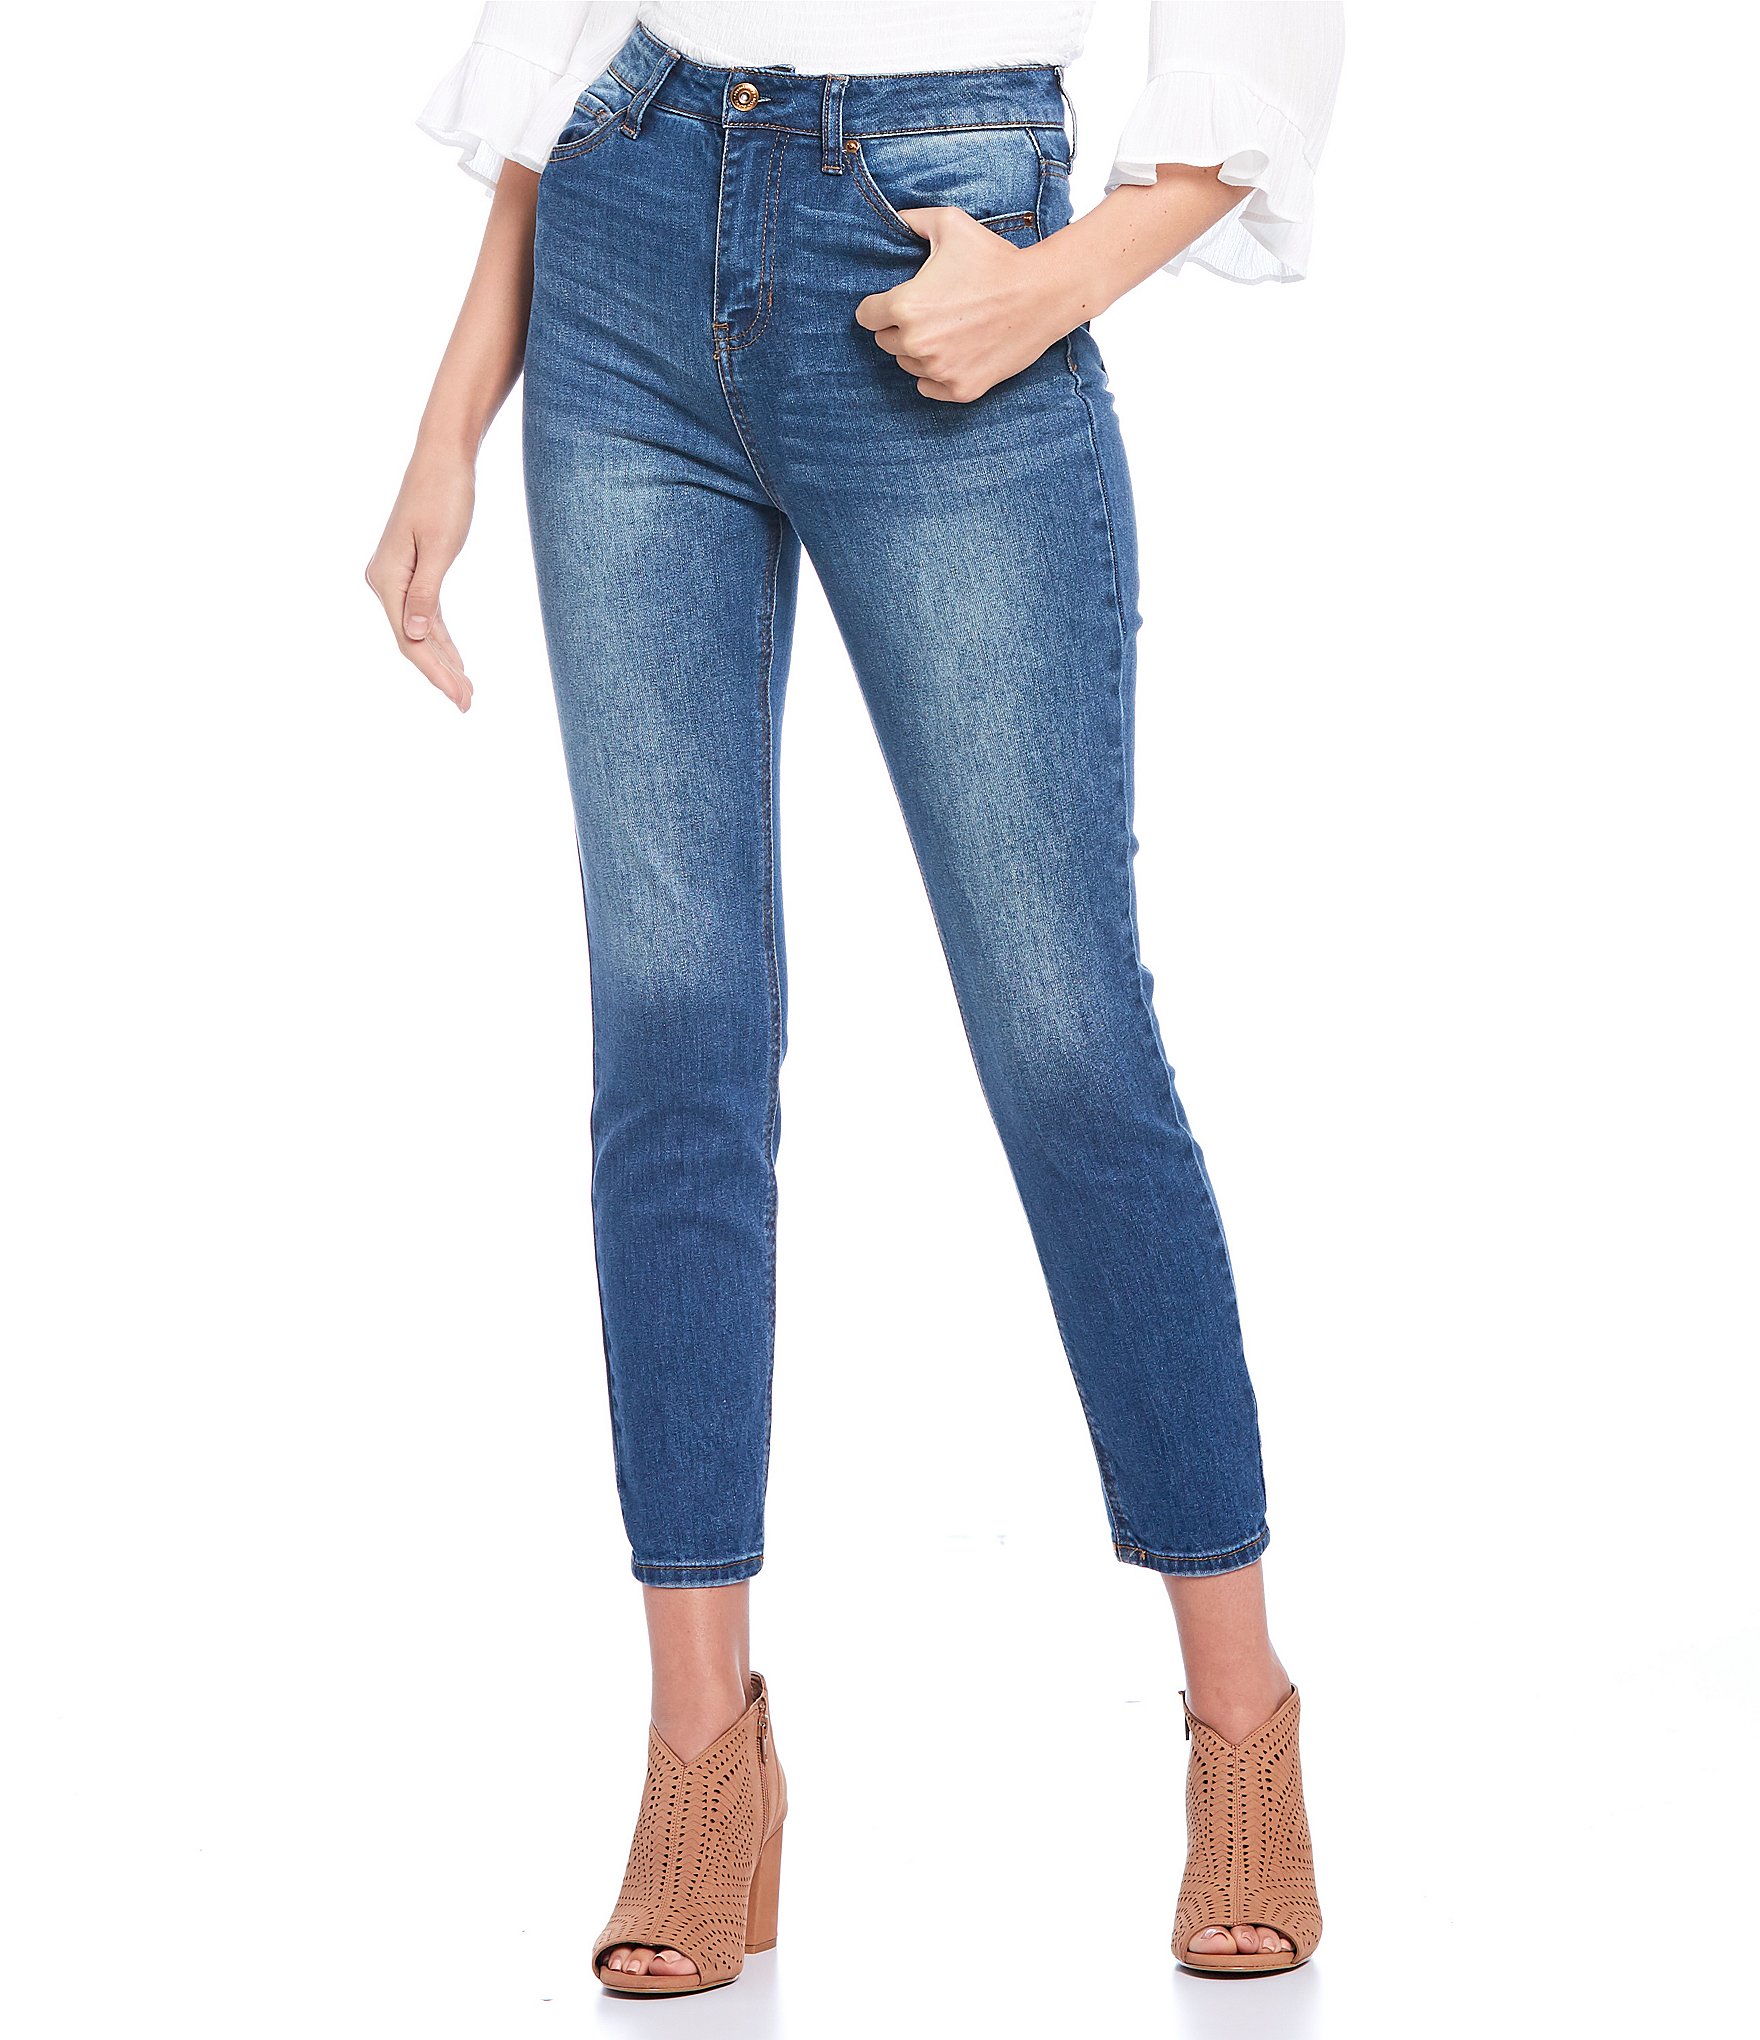 Hippie Laundry Almost Vintage Super High Rise Skinny Jeans | Dillard's